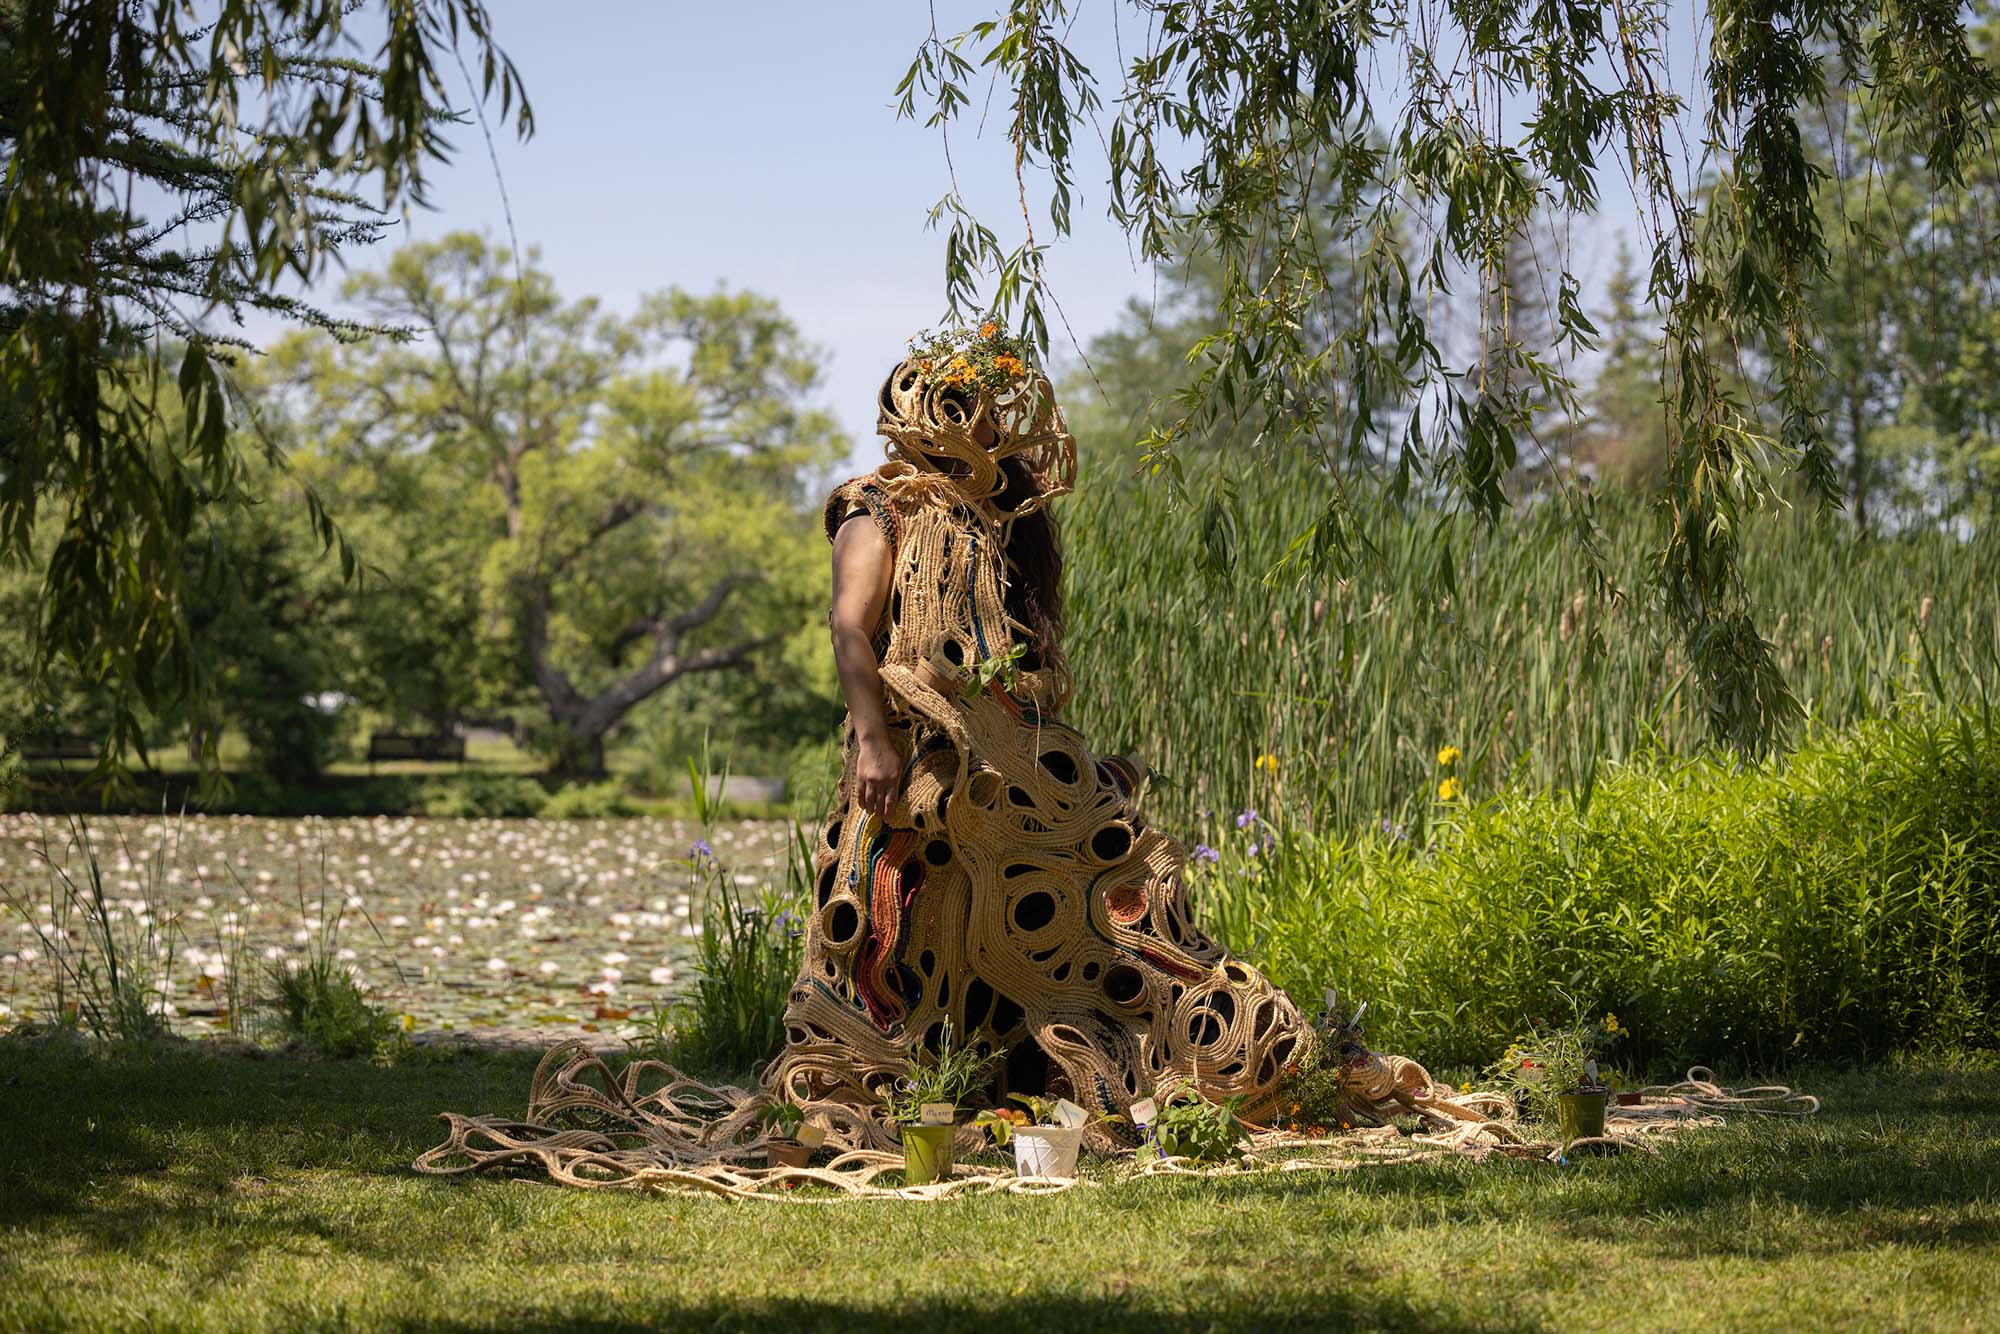 A performing artist draped in sculpture standing in a park